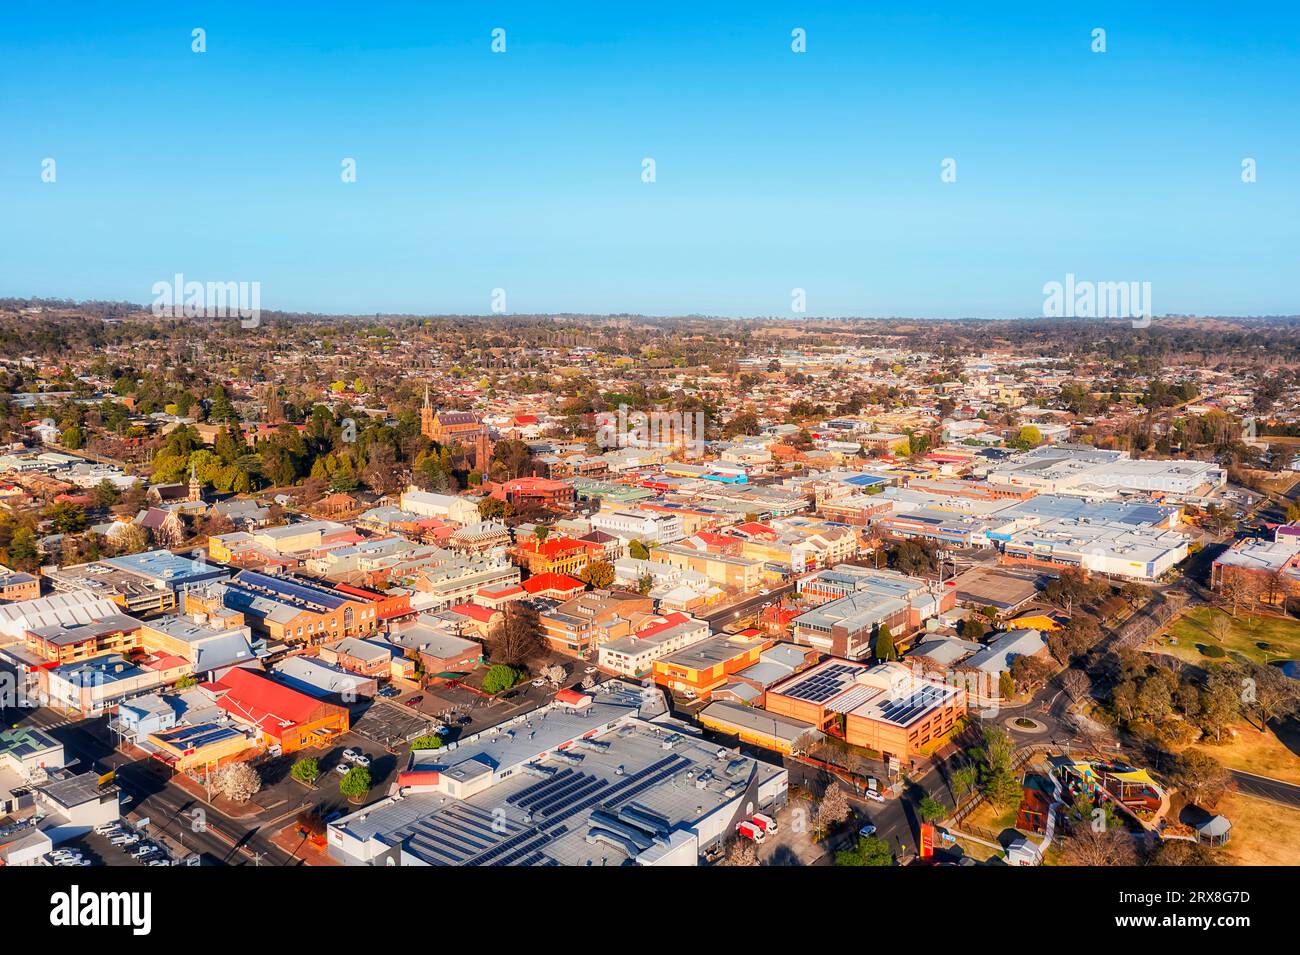 Downtown or rural regional town Armidale on highland plateau in Australia - aerial townscape. Stock Photo